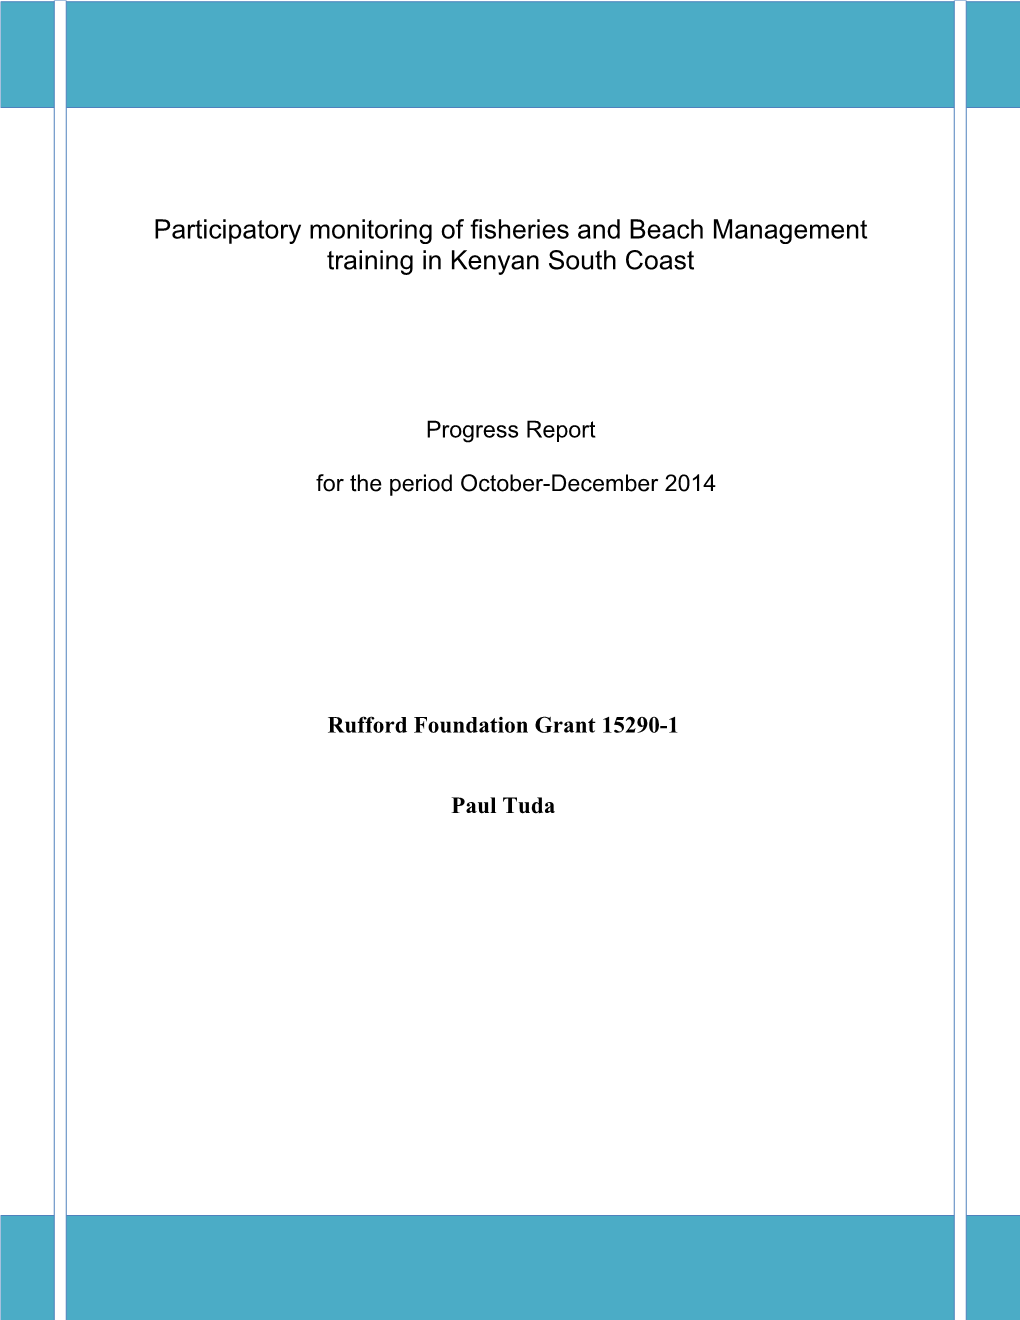 Participatory Monitoring of Fisheries and Beach Management Training in Kenyan South Coast